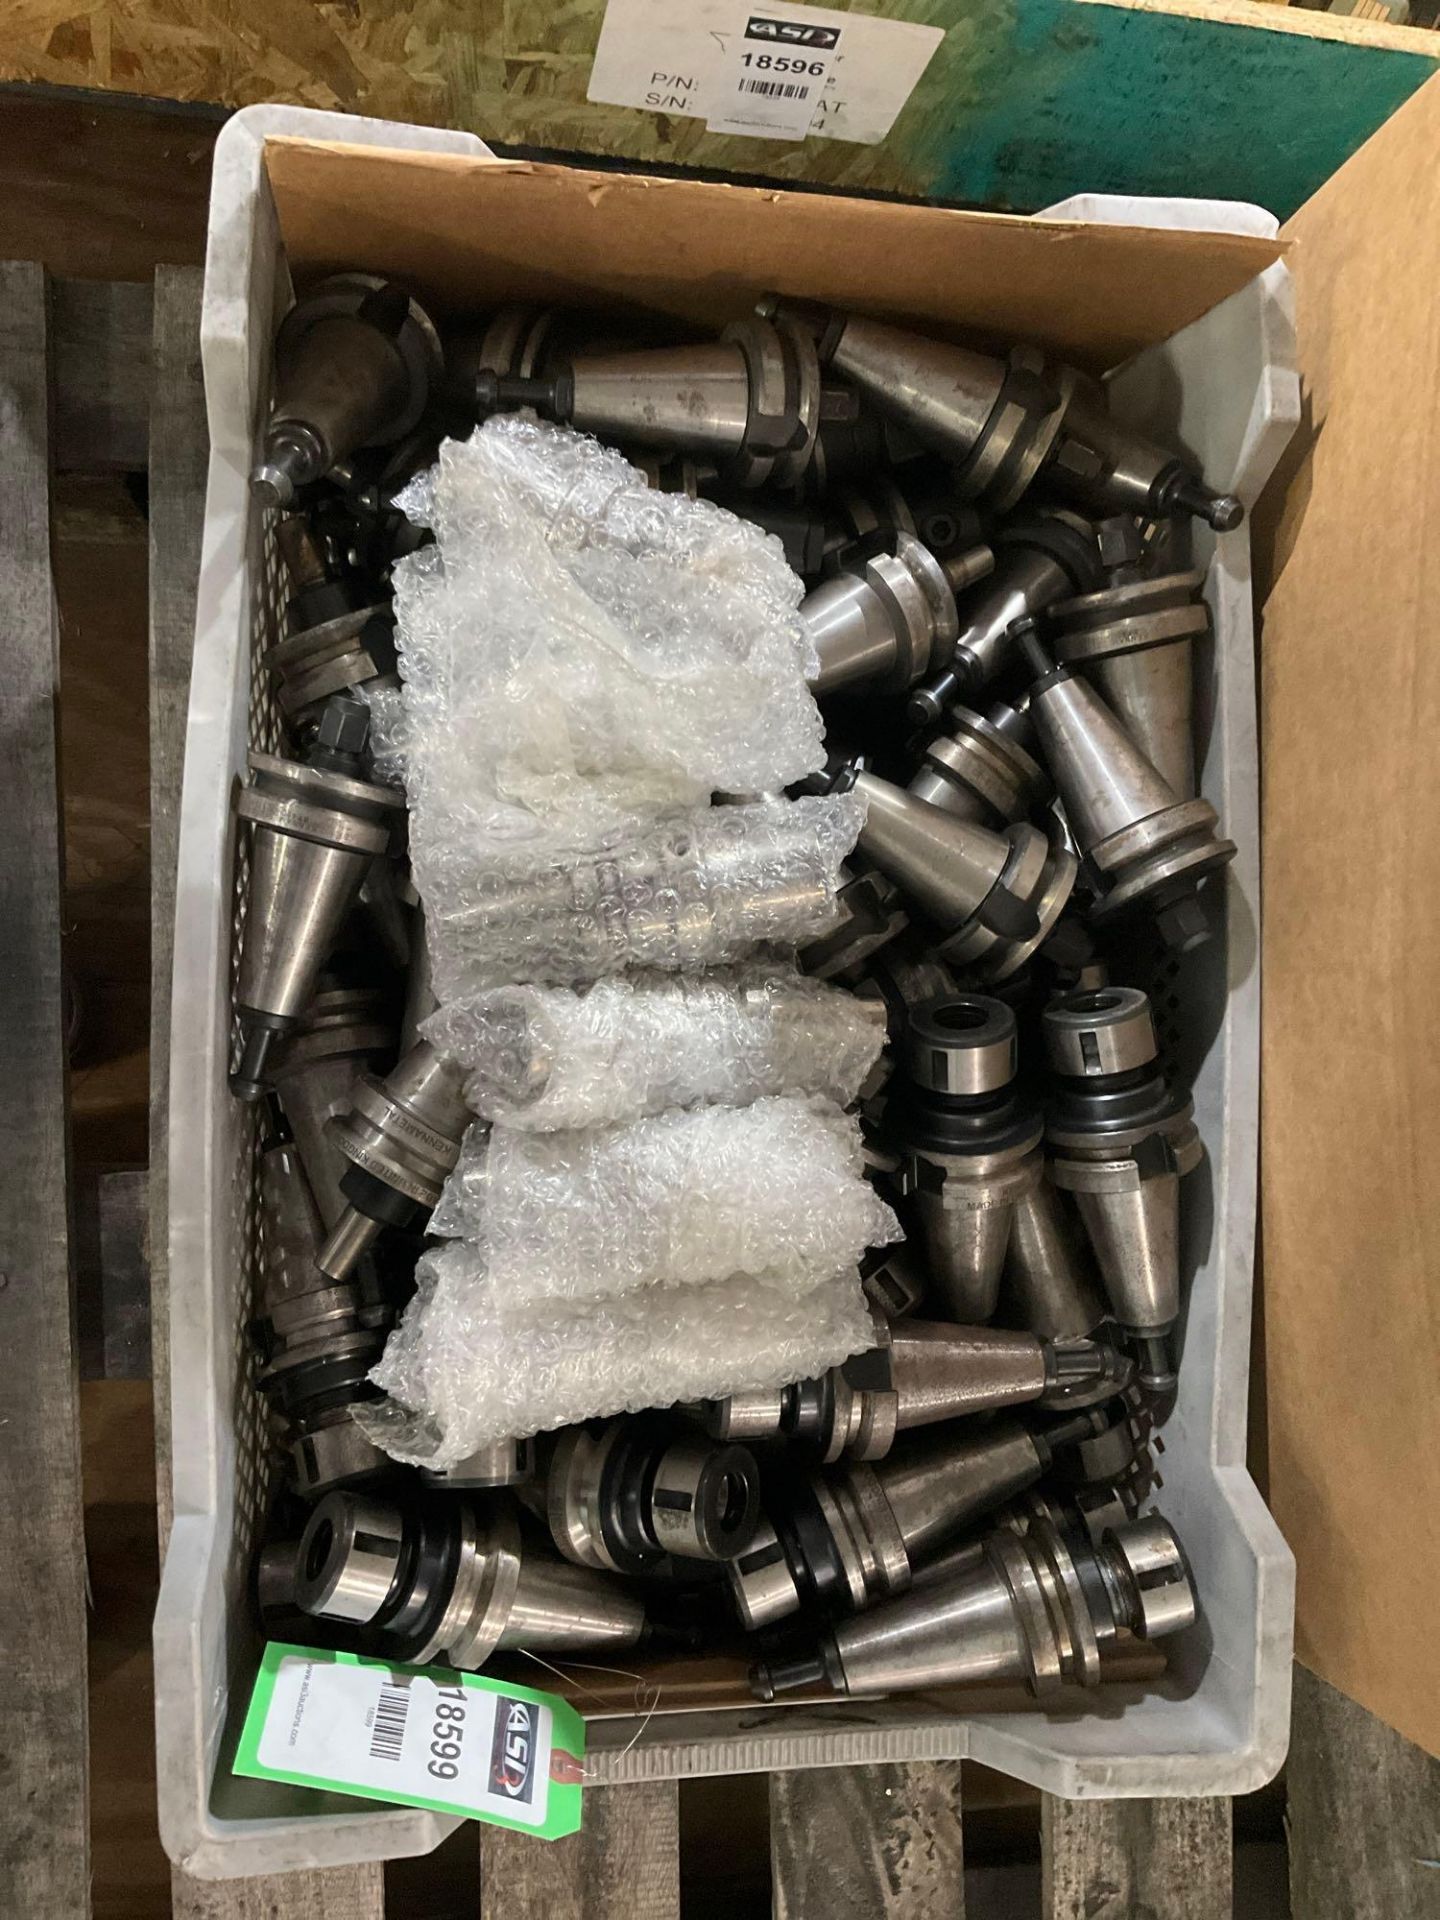 OVER 200 PARLEC, KENNAMETAL, BIG DAISHOWA...COLLET CHUCK; VARIOUS MAKES, MODELS, AND SIZES - Image 11 of 11